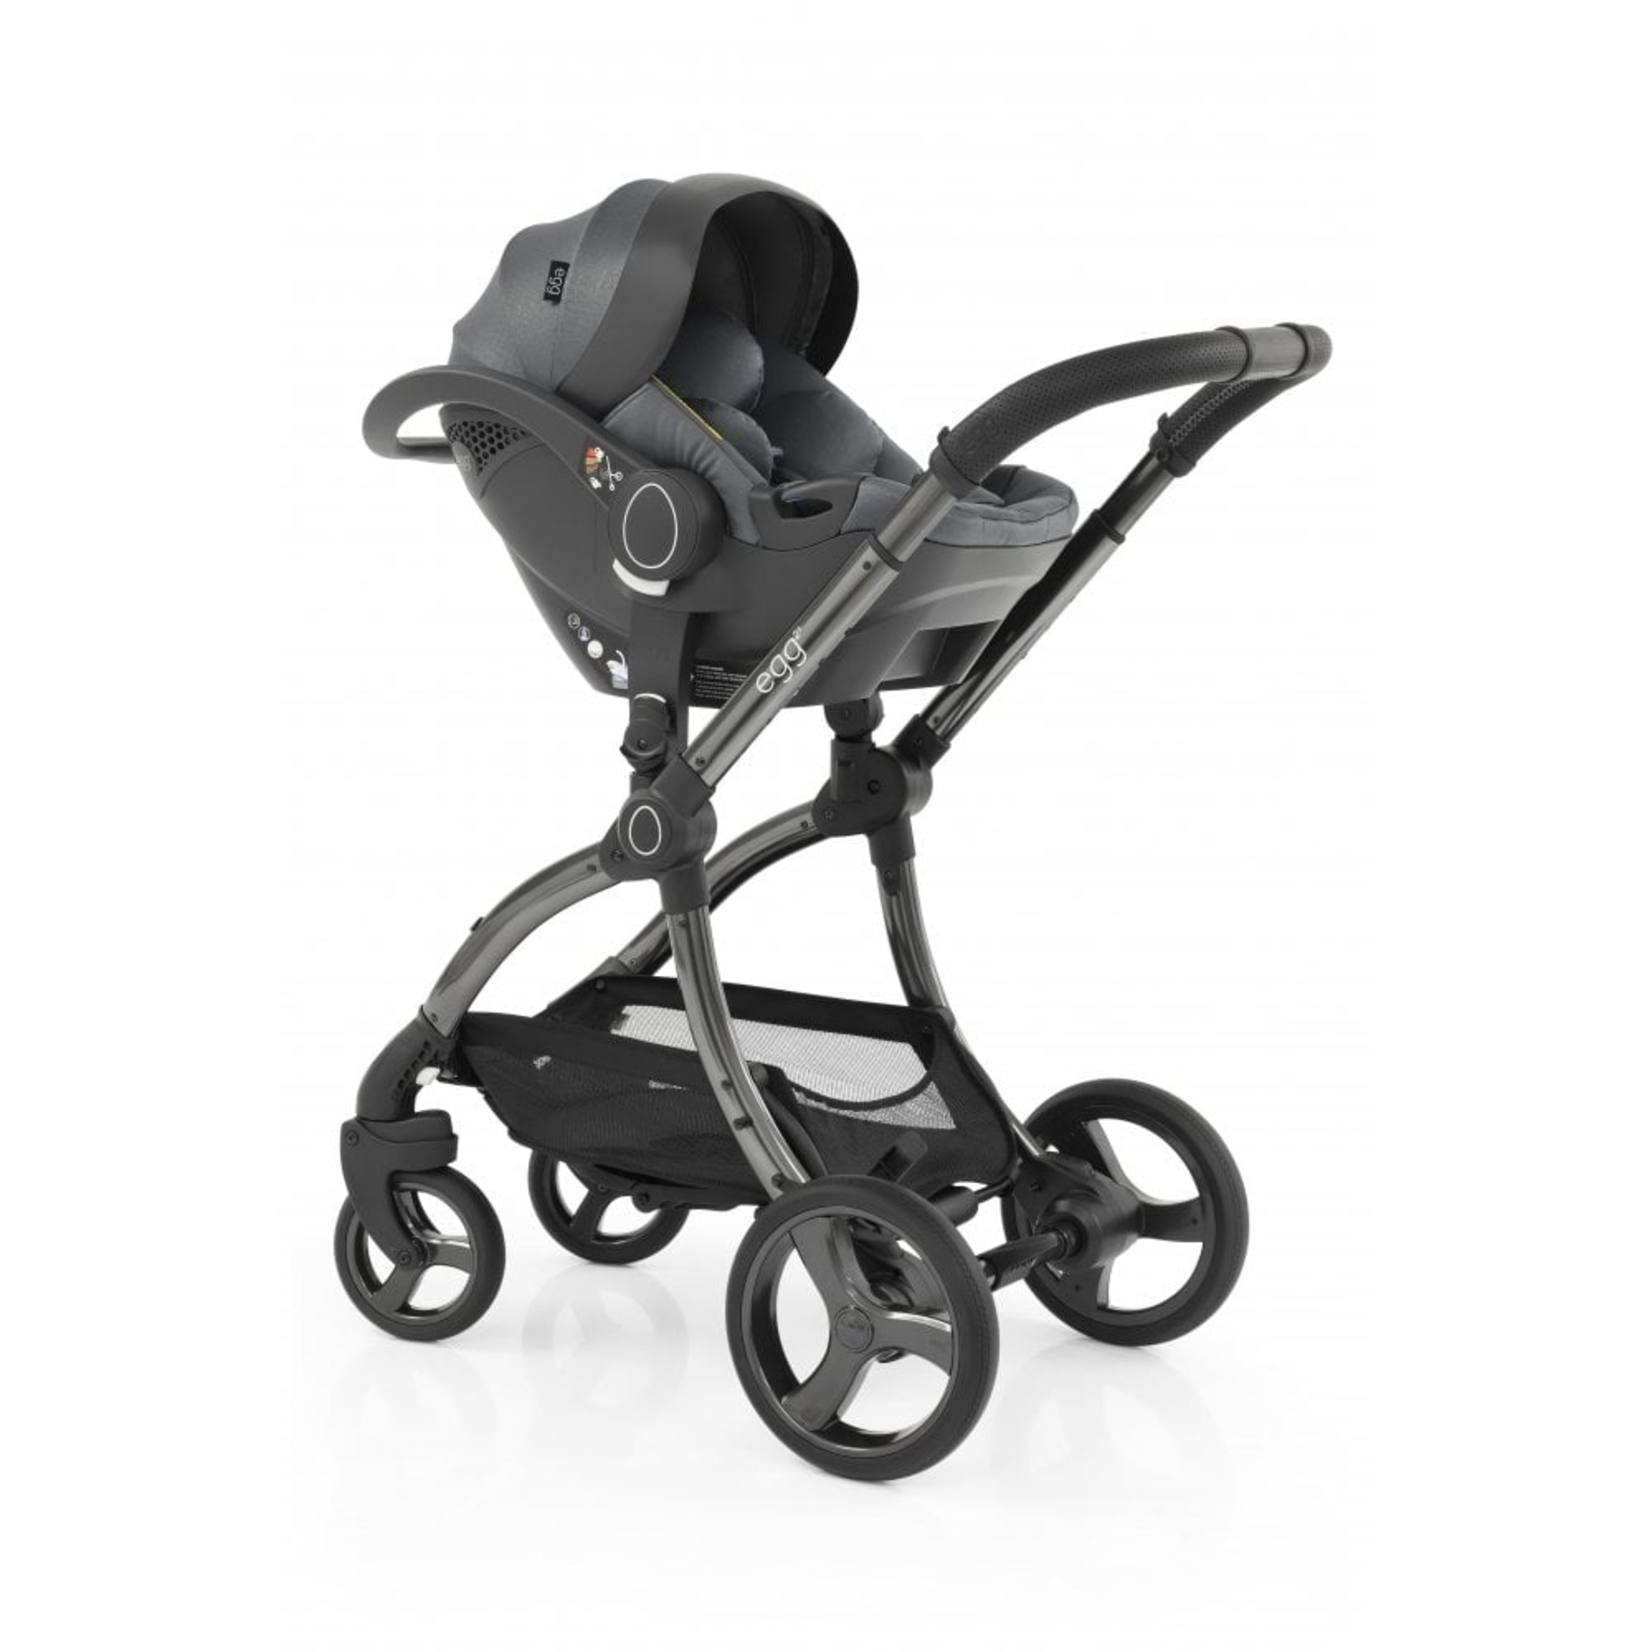 EGG EGG 2 ( 2 IN 1 ) INFANT CARSEAT TRAVEL SYSTEM - JURASSIC GREY (SPECIAL EDITION)